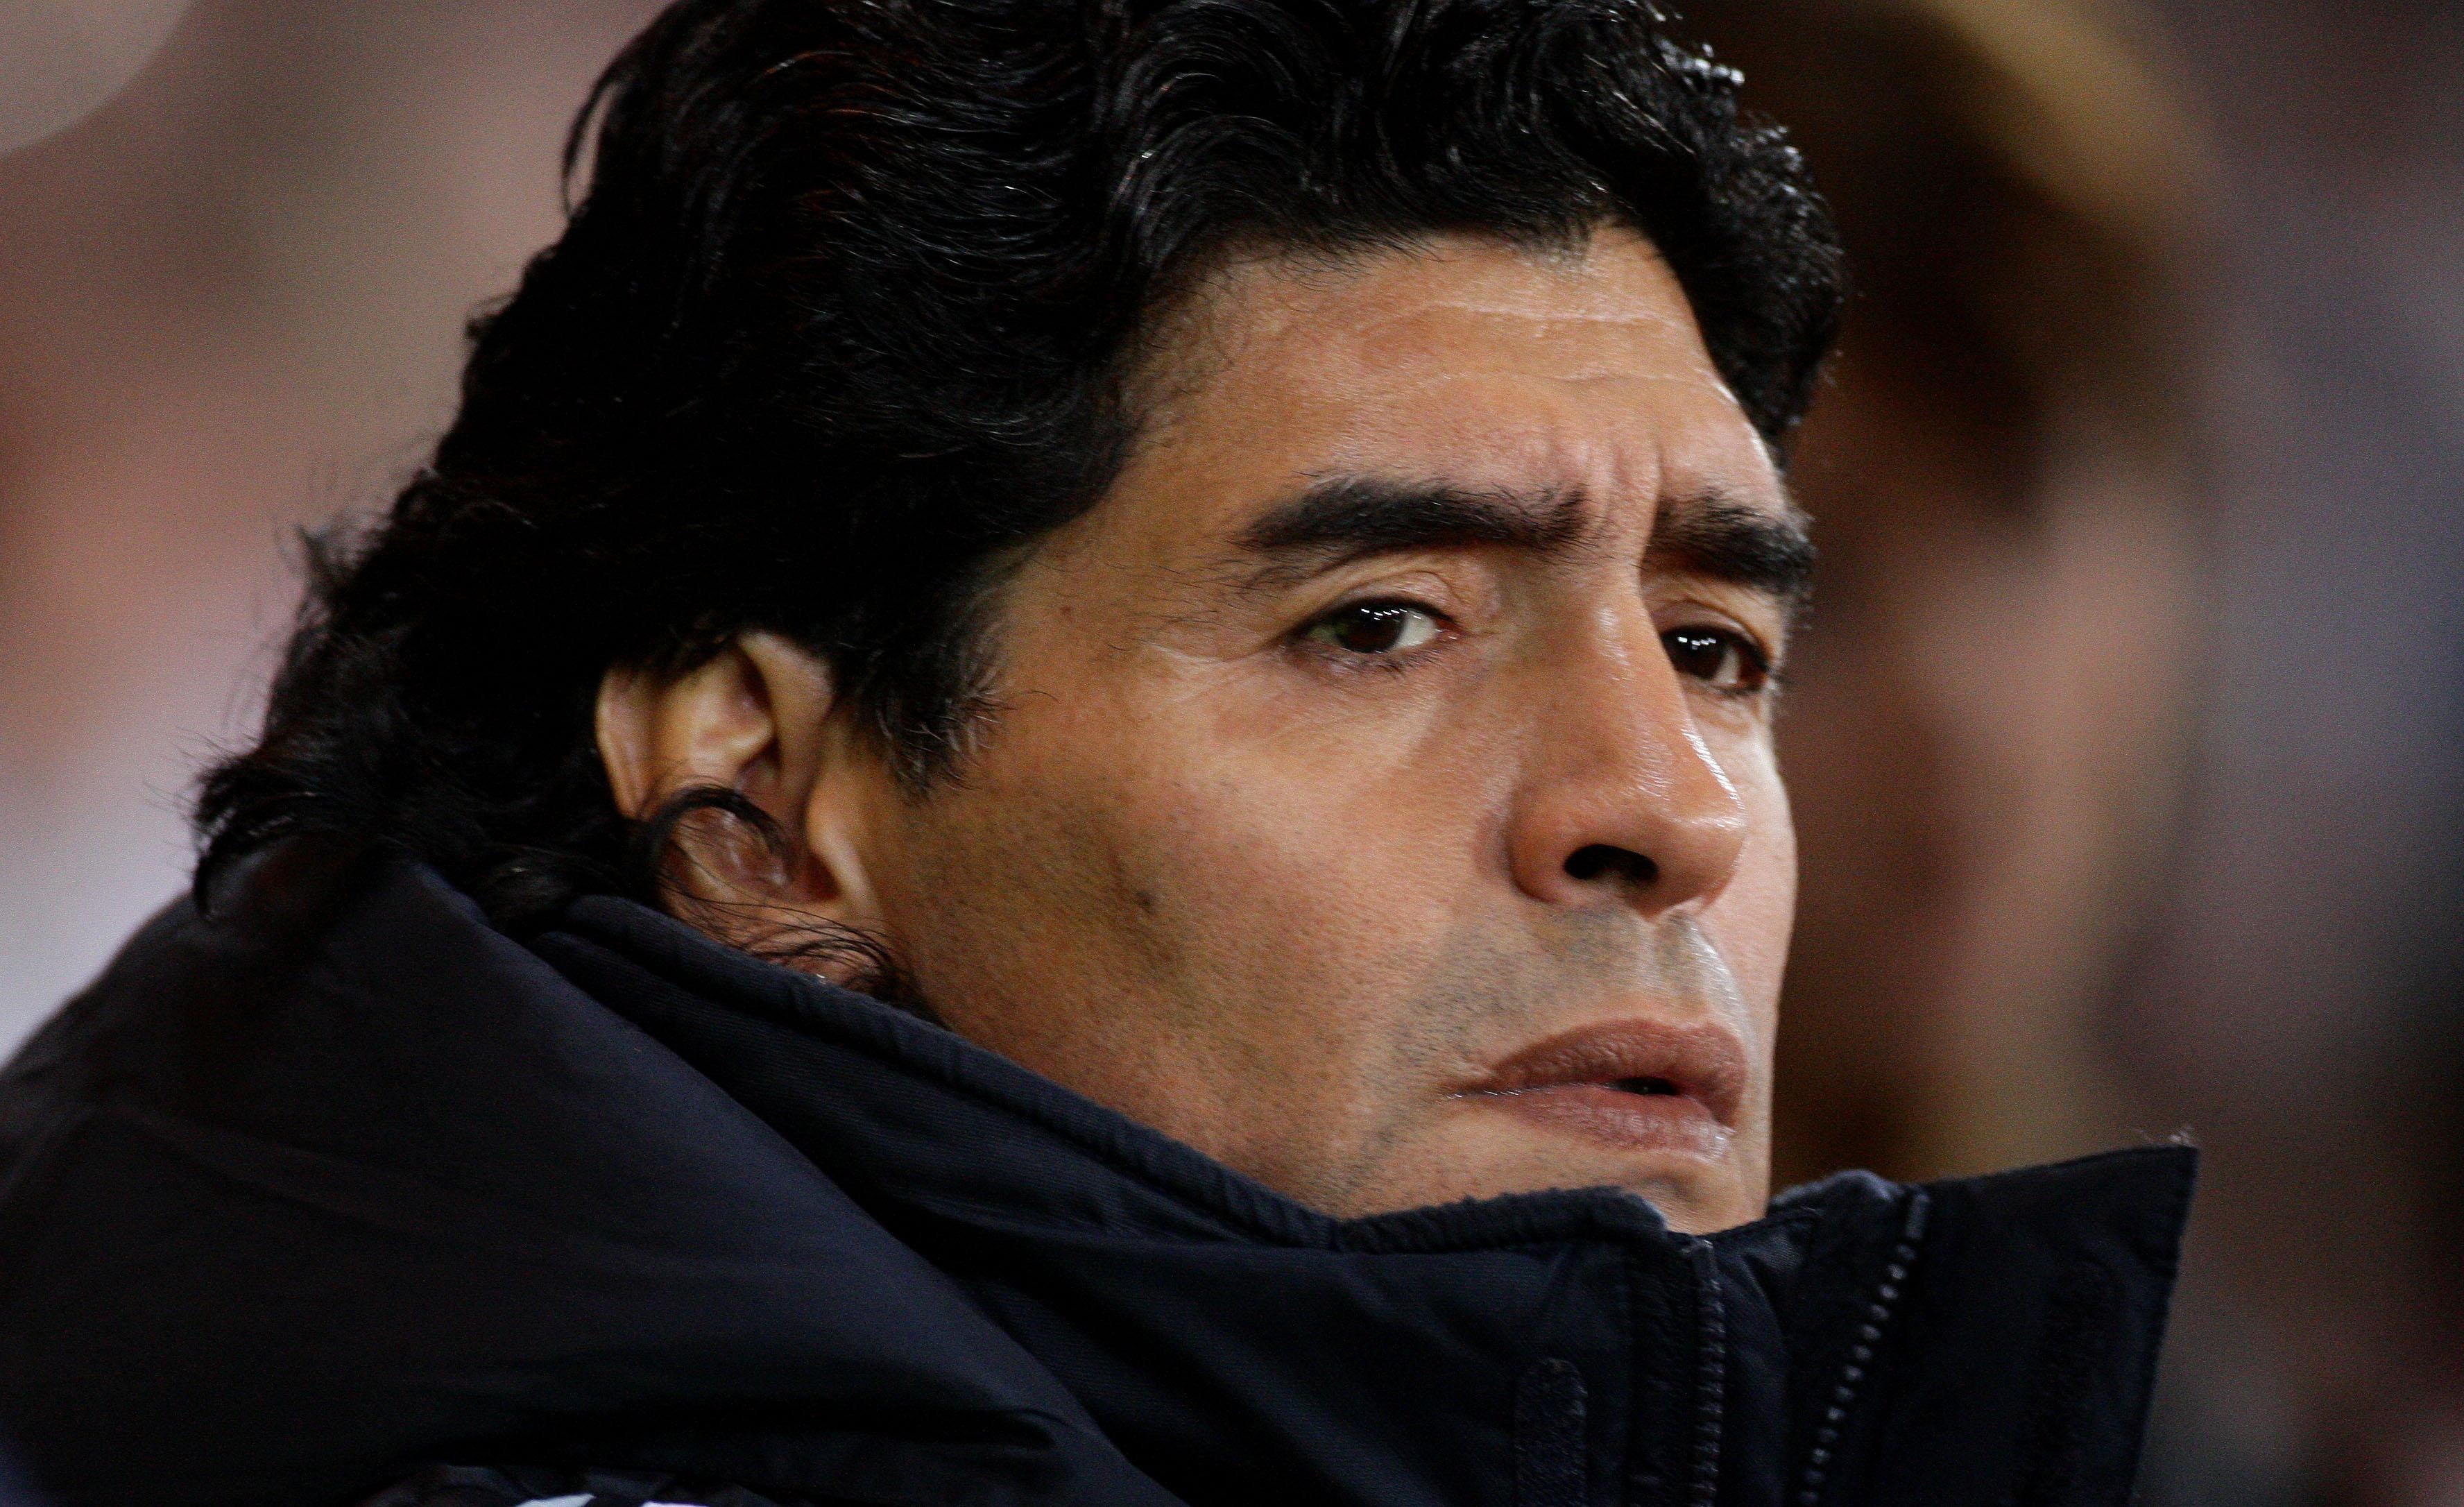 Diego Maradona is making an ‘amazing recovery’ from surgery to remove a brain clot